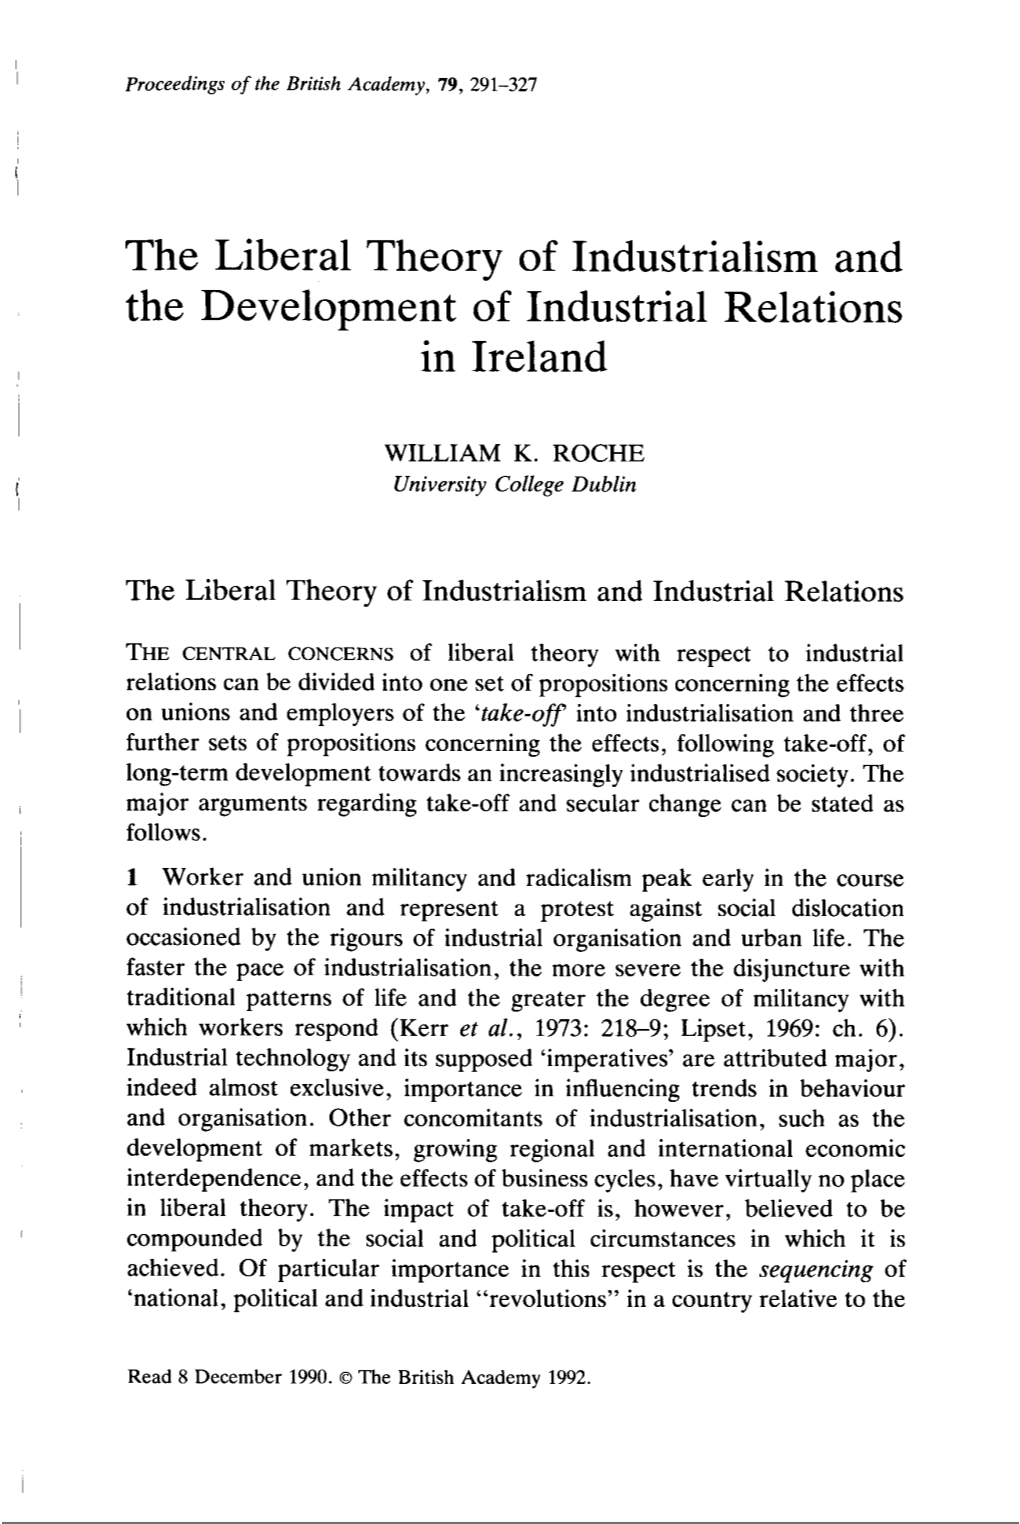 The Liberal Theory of Industrialism and the Development of Industrial Relations in Ireland